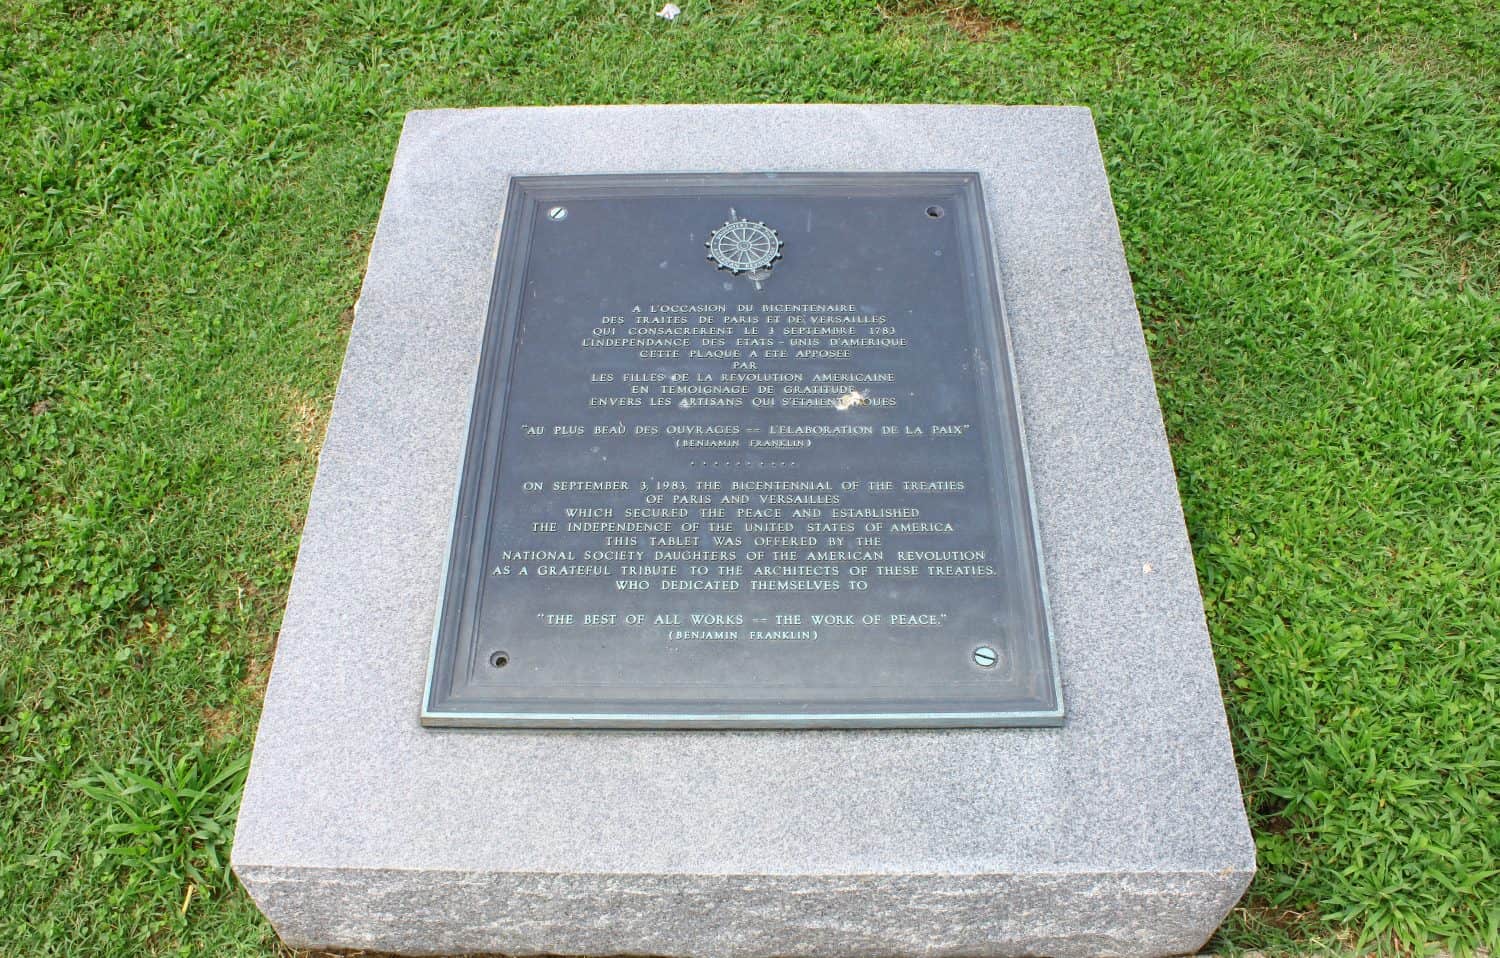 Tablet remembering the Bicentennial of the treaties of Paris and Versailles which secured the peace and established independence of the United States of America.